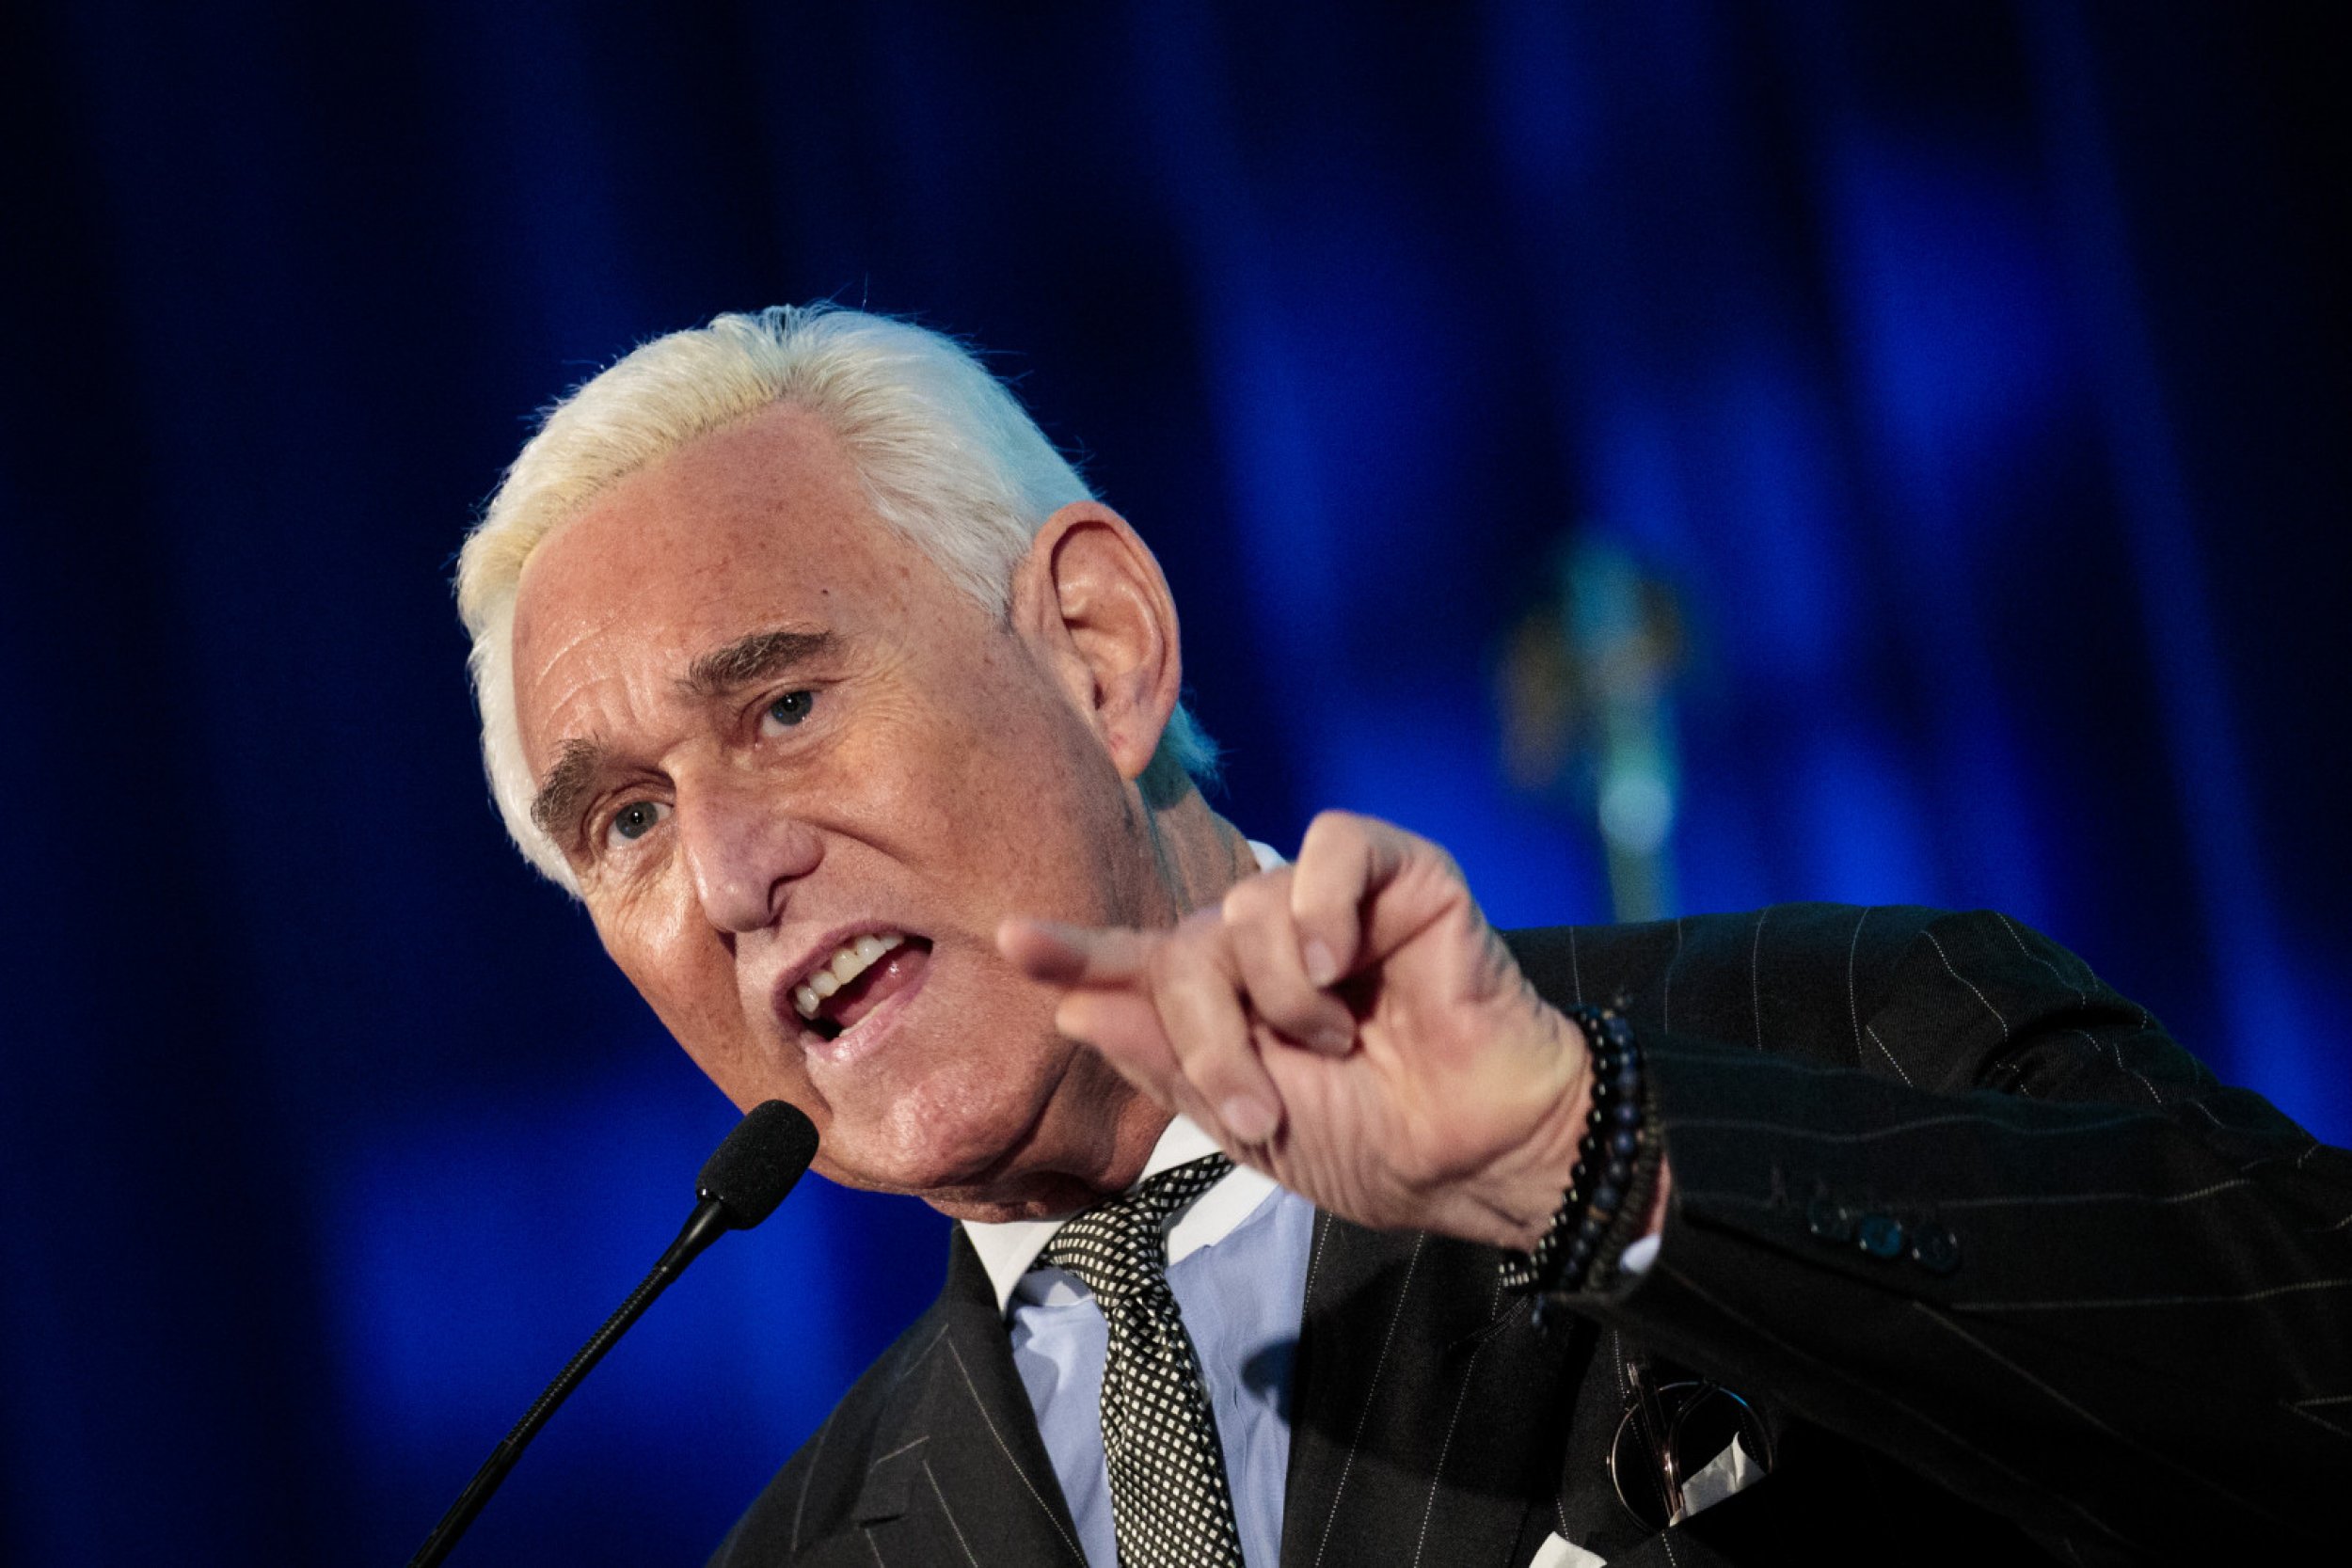 Trump Ally Roger Stone Says Mueller Probed His Sex Life This Has Been Hell